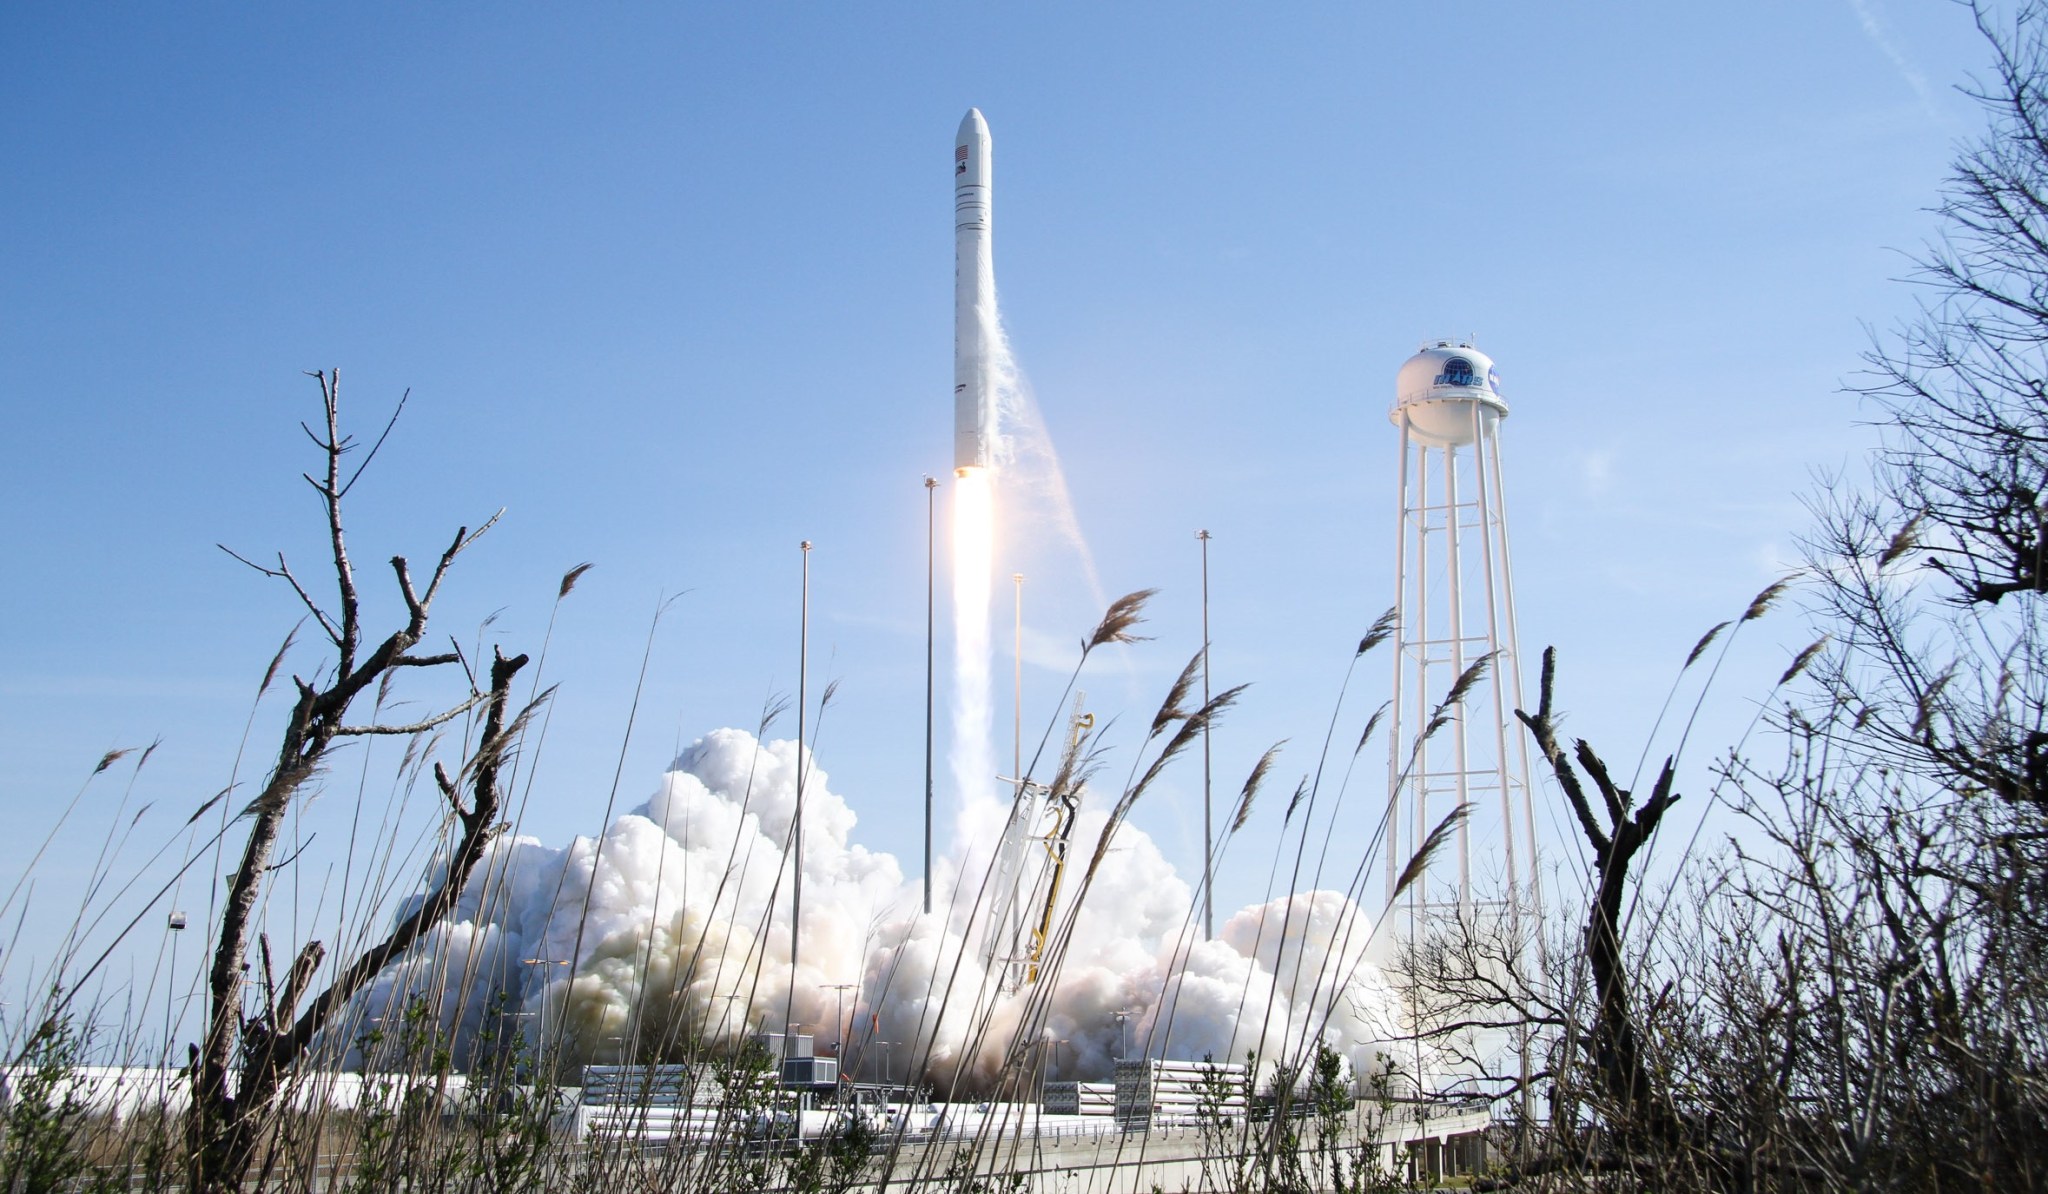 On April 17, 2019, at 4:46 p.m. EST, Northrop Grumman's Antares rocket carried a Cygnus spacecraft into orbit, loaded with 7,600 pounds of research, crew supplies, and hardware to the International Space Station.